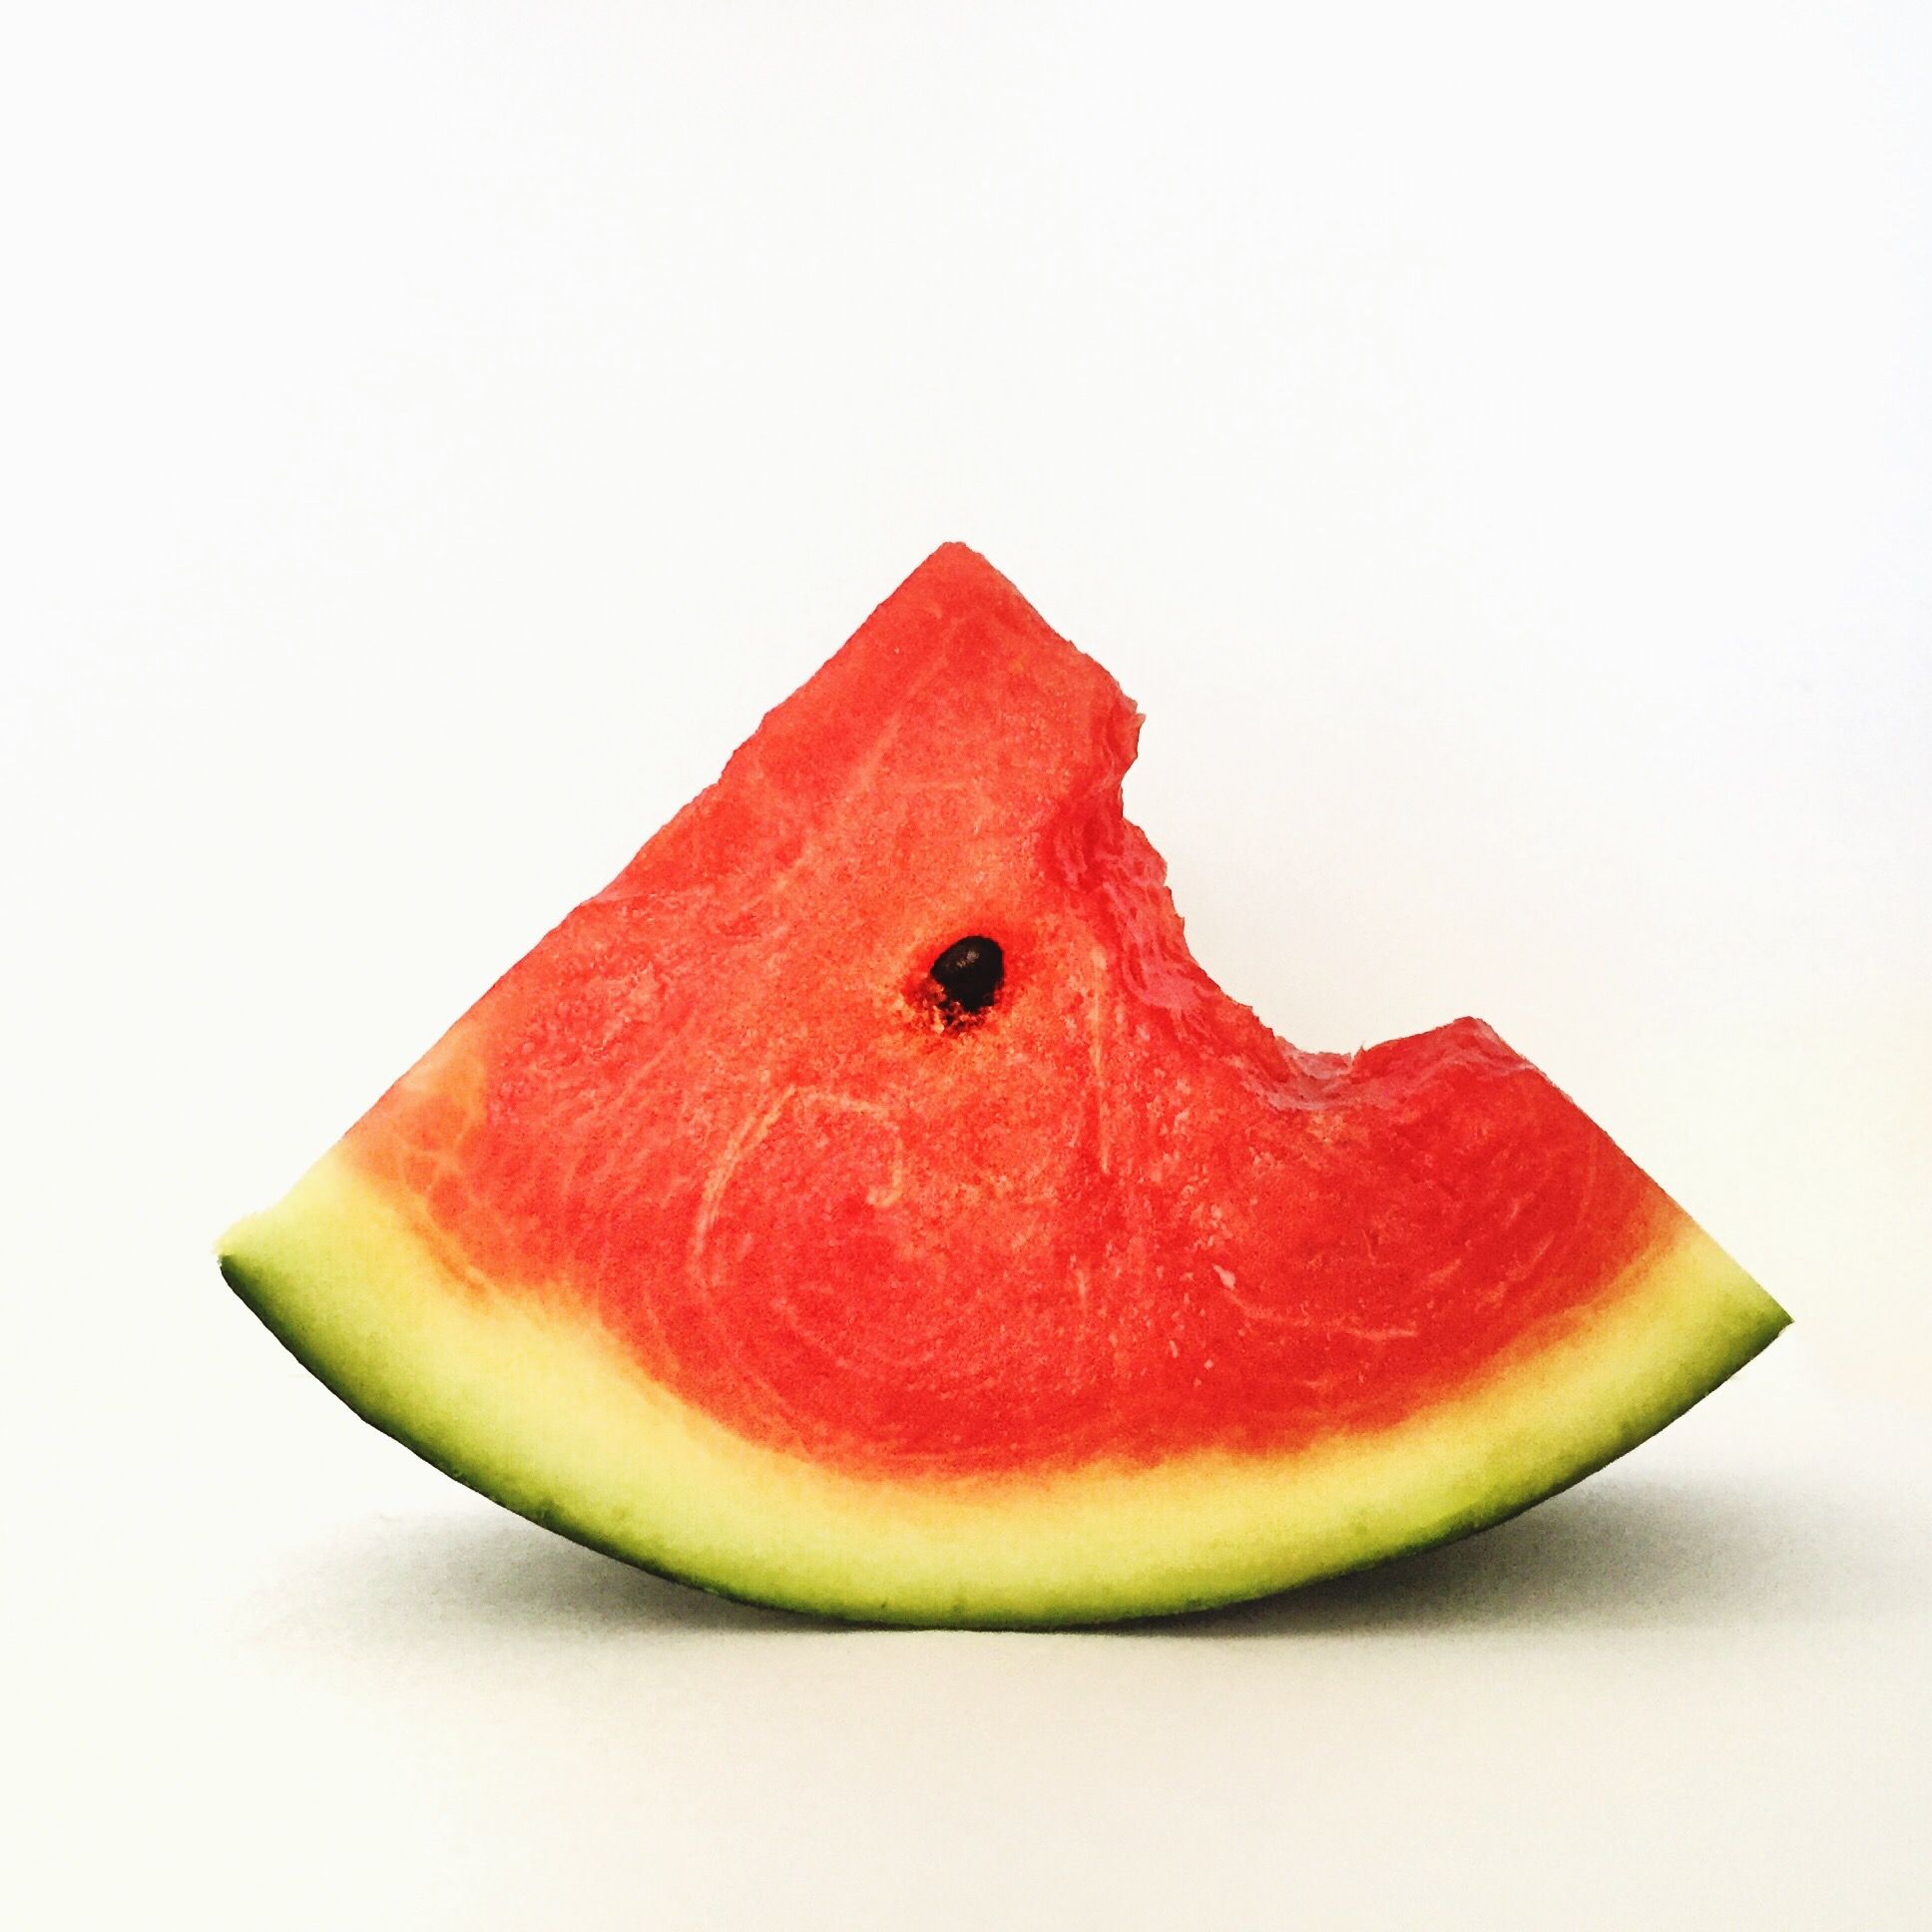 Watermelon, Melon, Citrullus, Fruit, Food, Plant, Cucumber, gourd, and melon family, Produce, Superfood, Seedless fruit, 